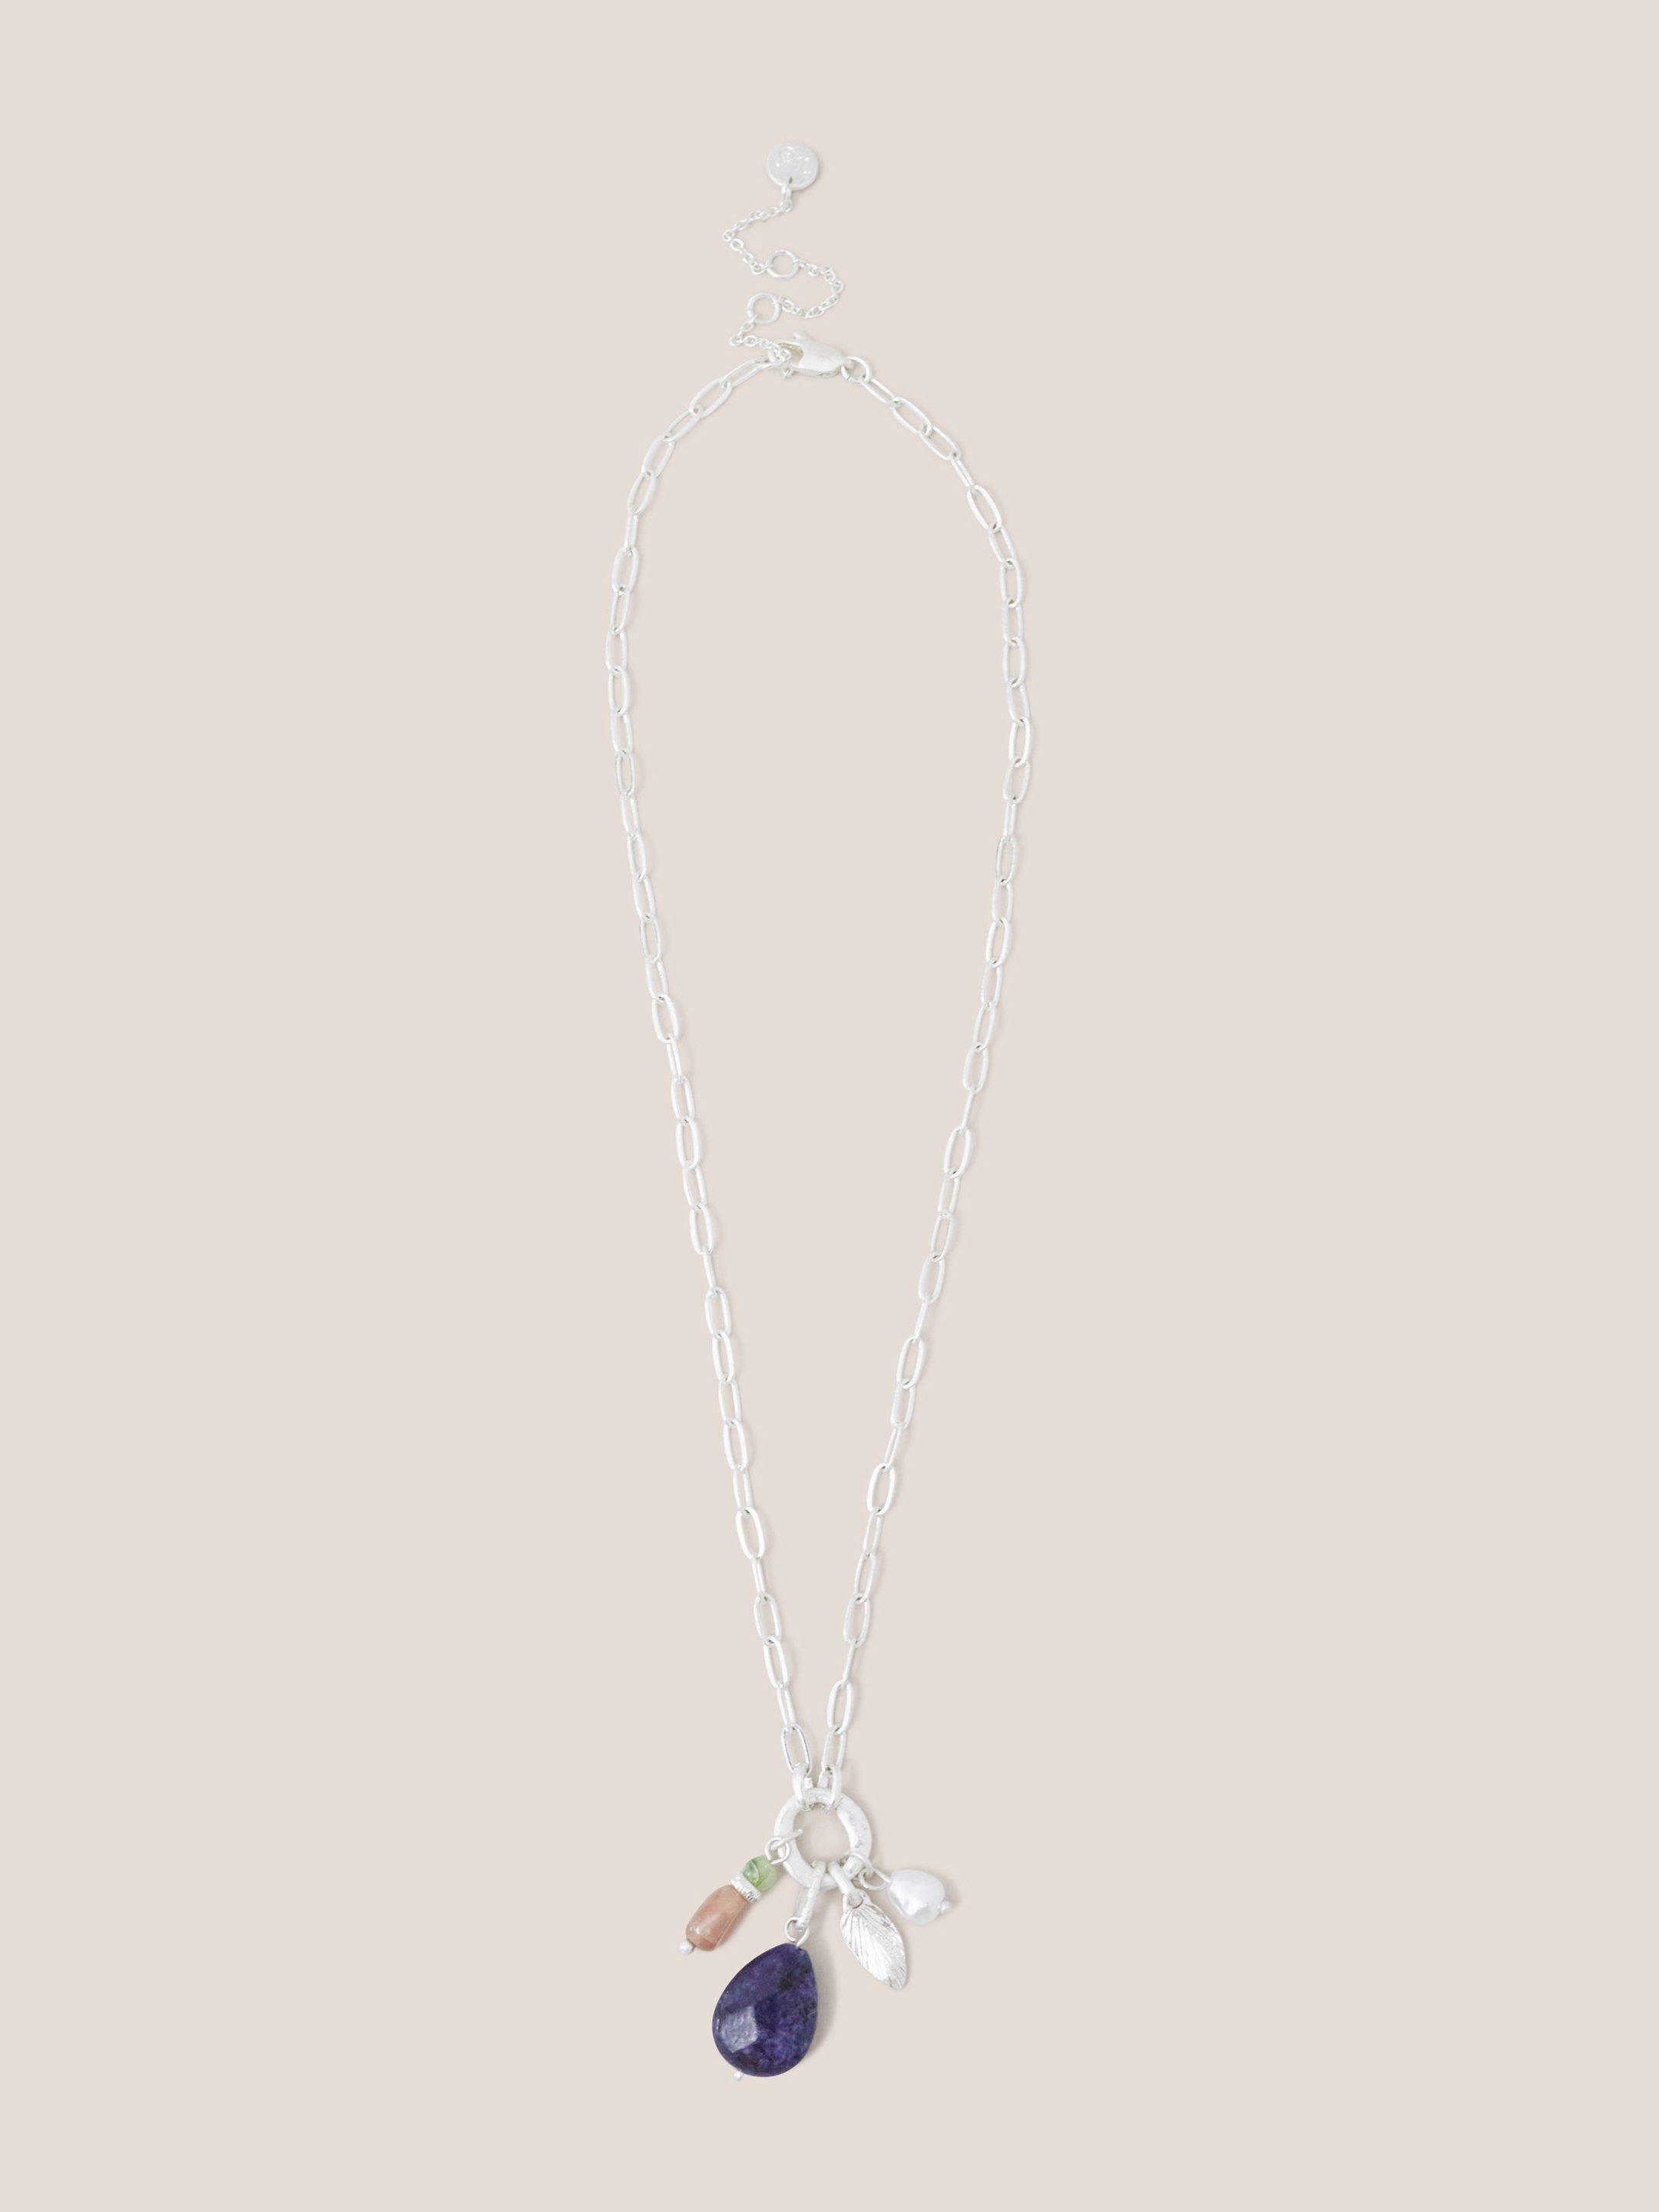 Multi Charm Necklace in BLUE MLT - FLAT FRONT